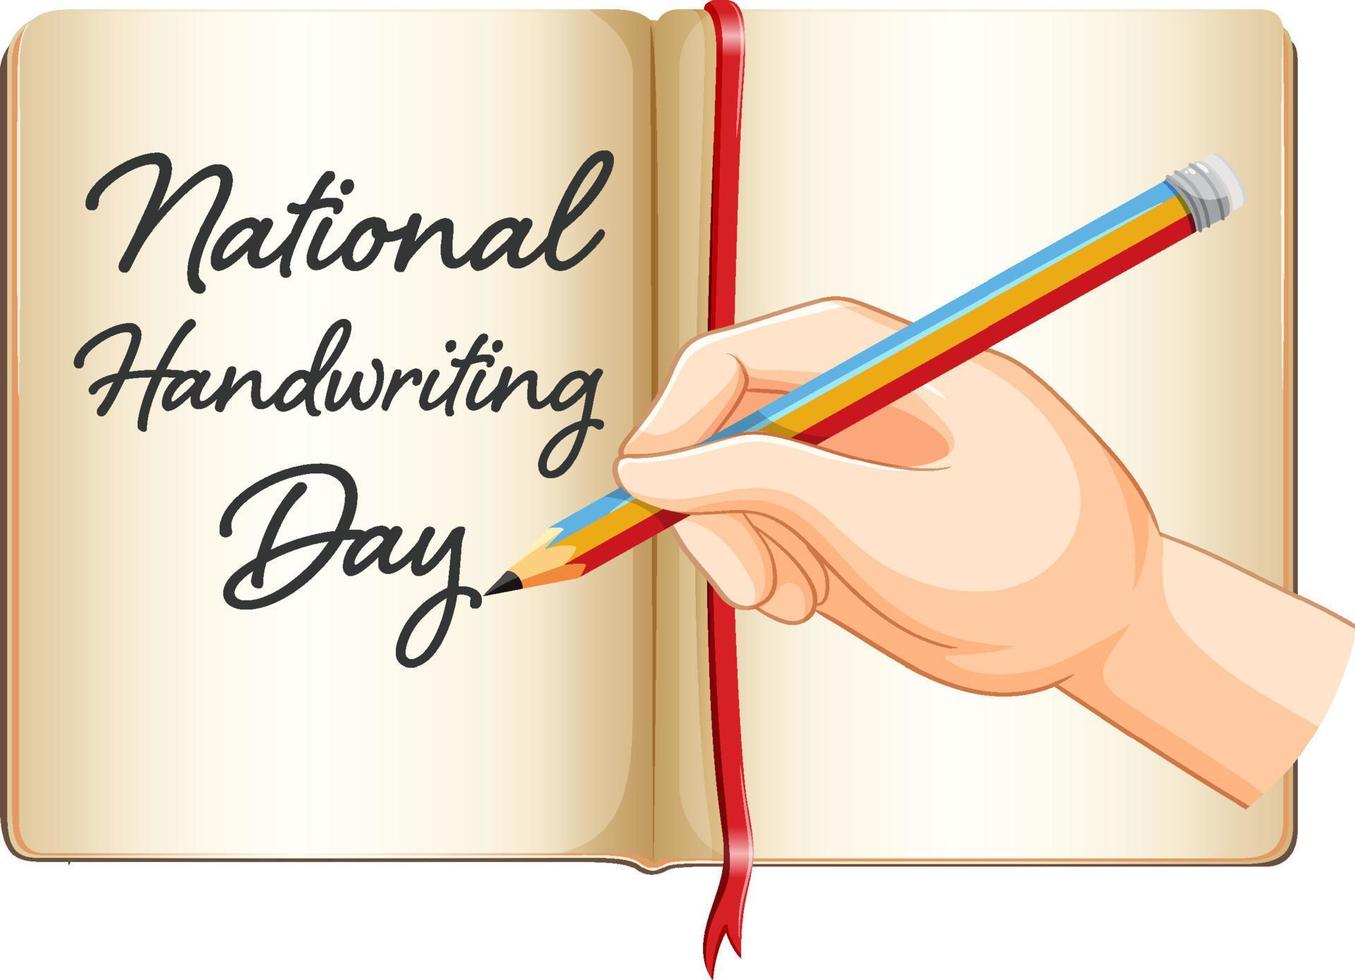 National Handwriting Day Concept vector